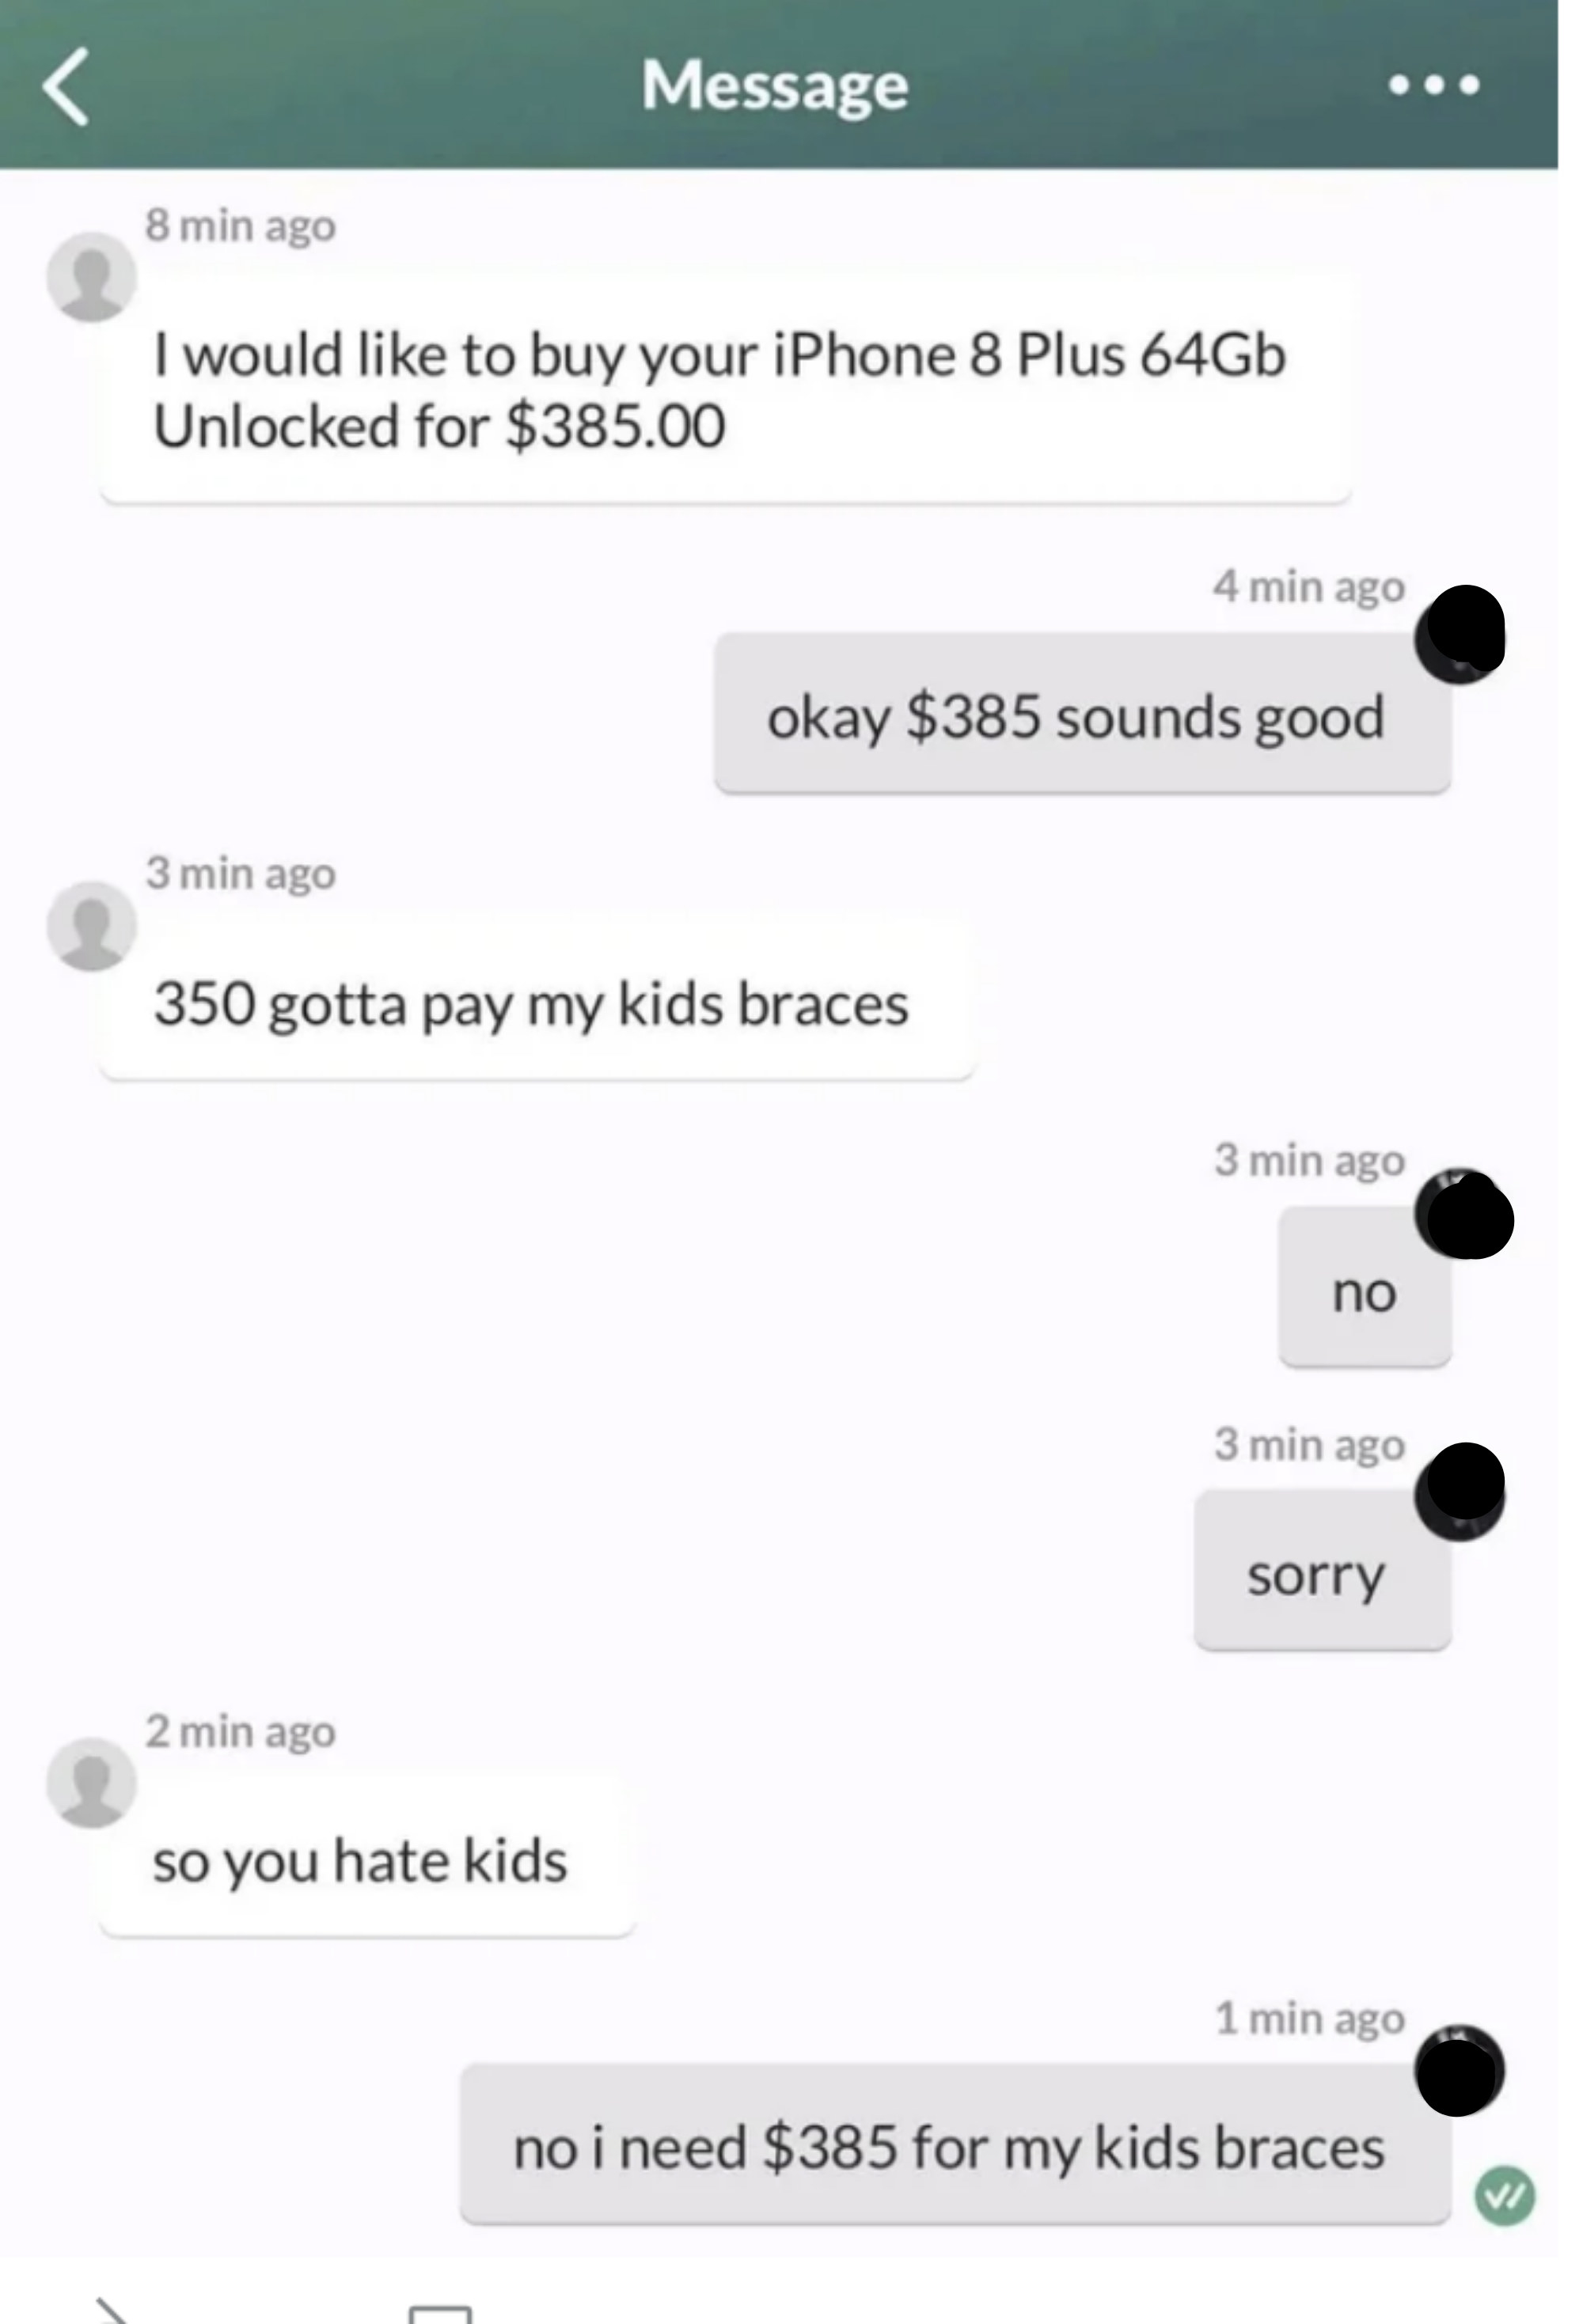 &quot;no i need $385 for my kids braces&quot;